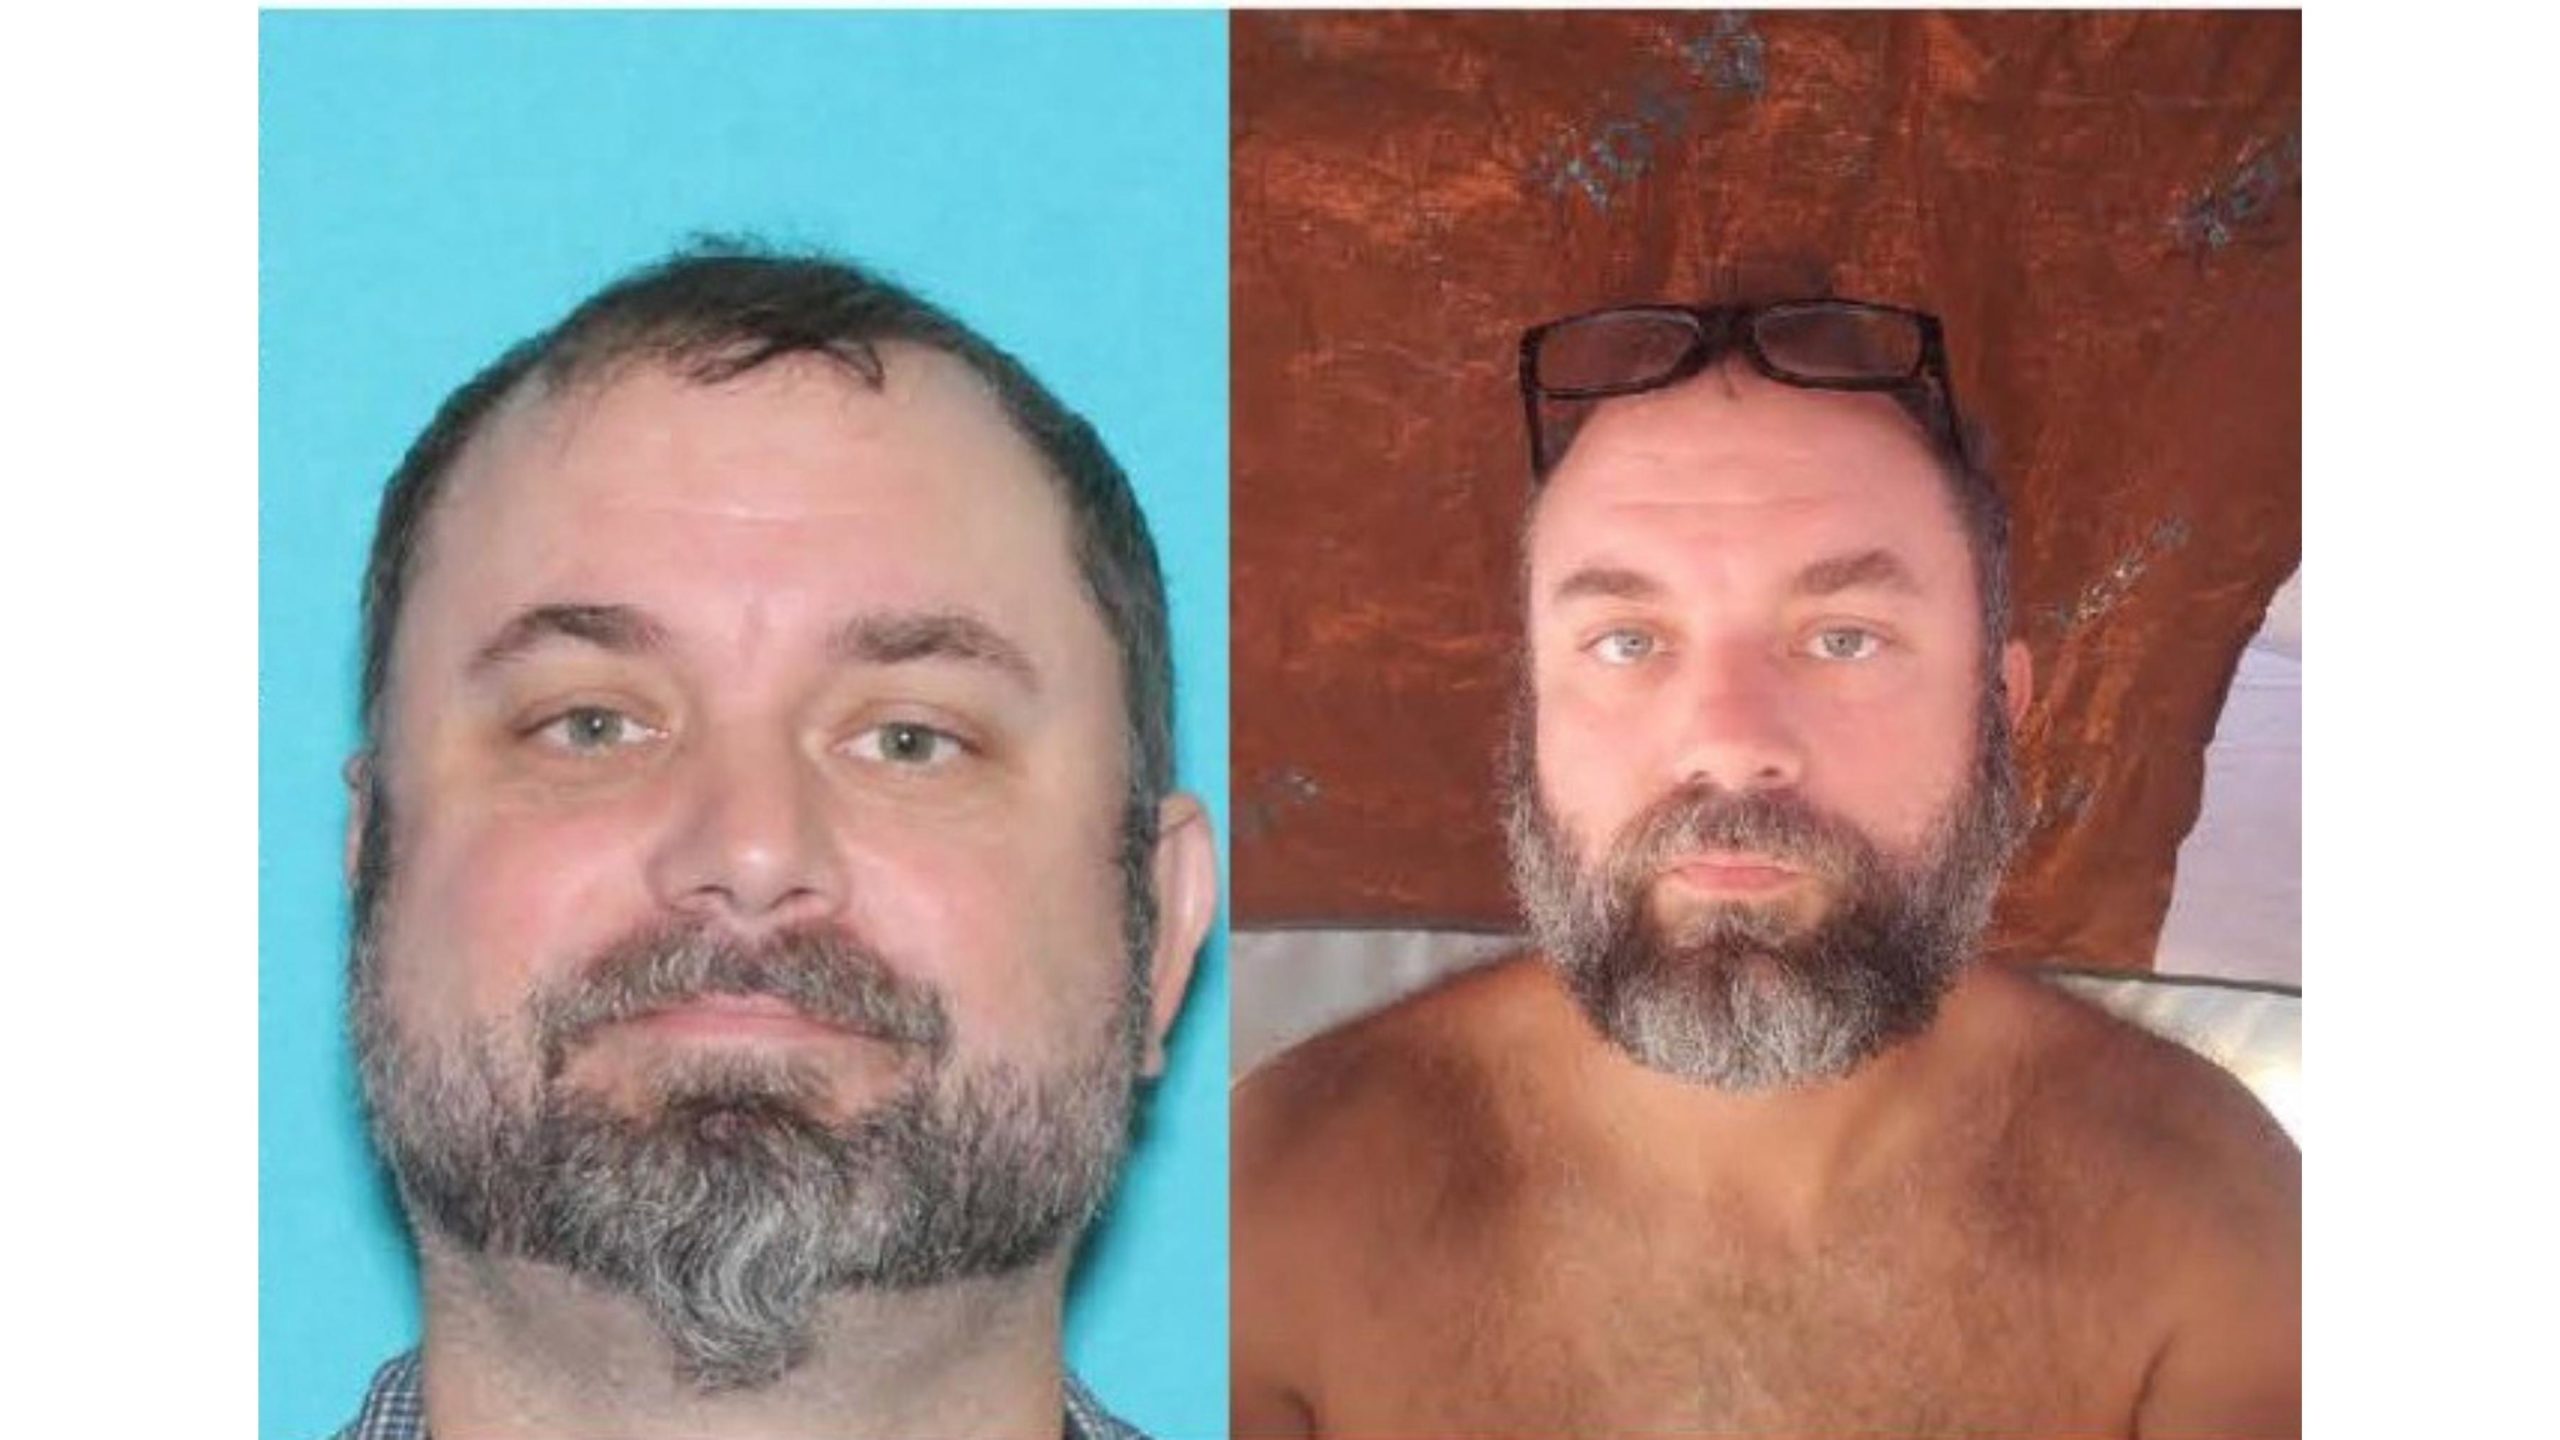 Suspect identified in Moab double murder - TownLift, Park City News